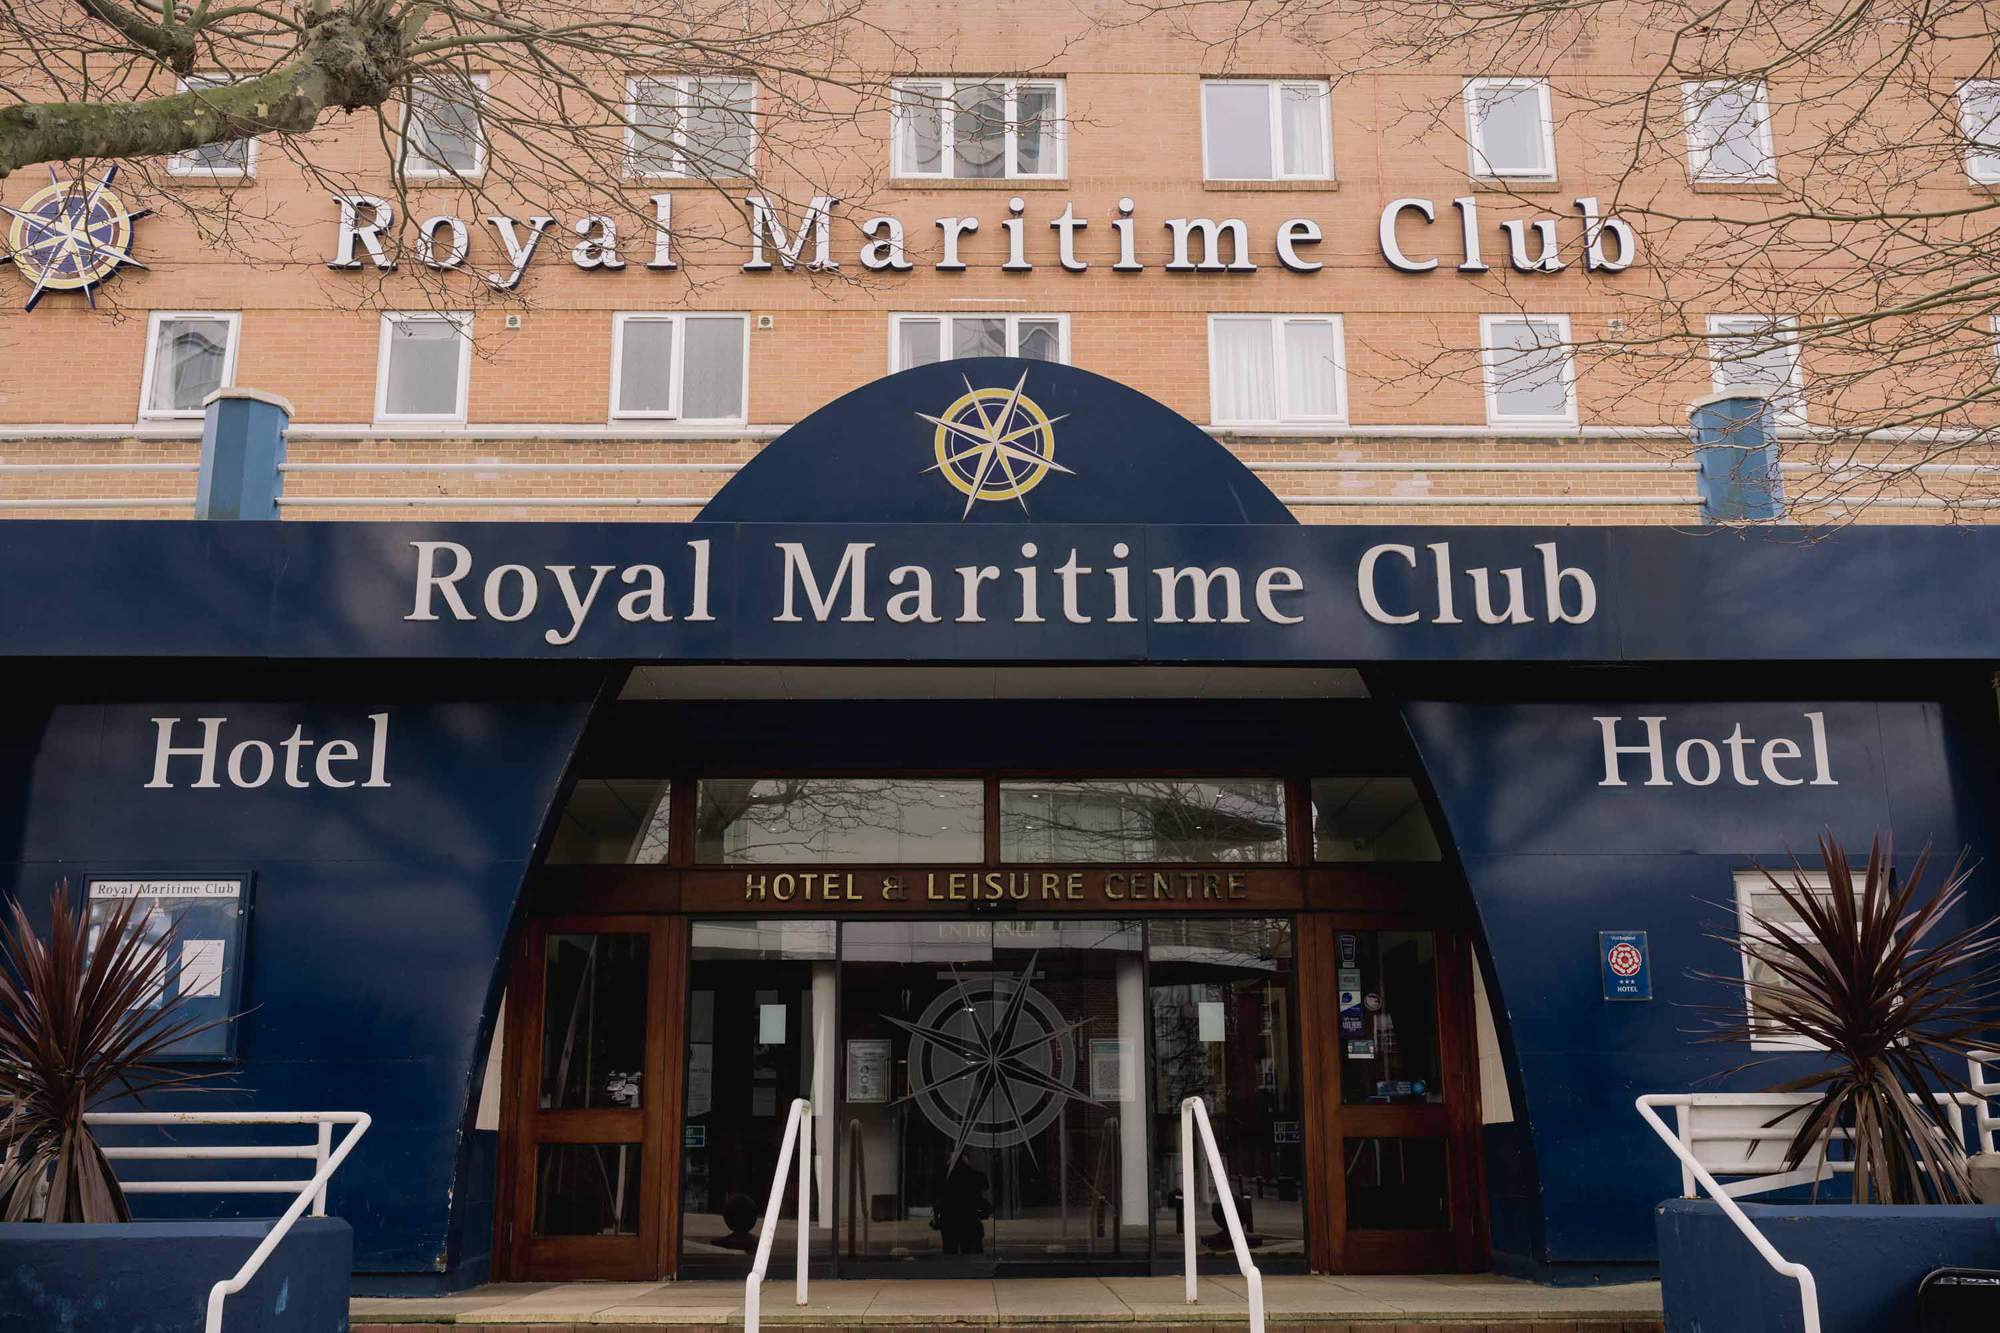 Royal Maritime Club entrance in Portsmouth.